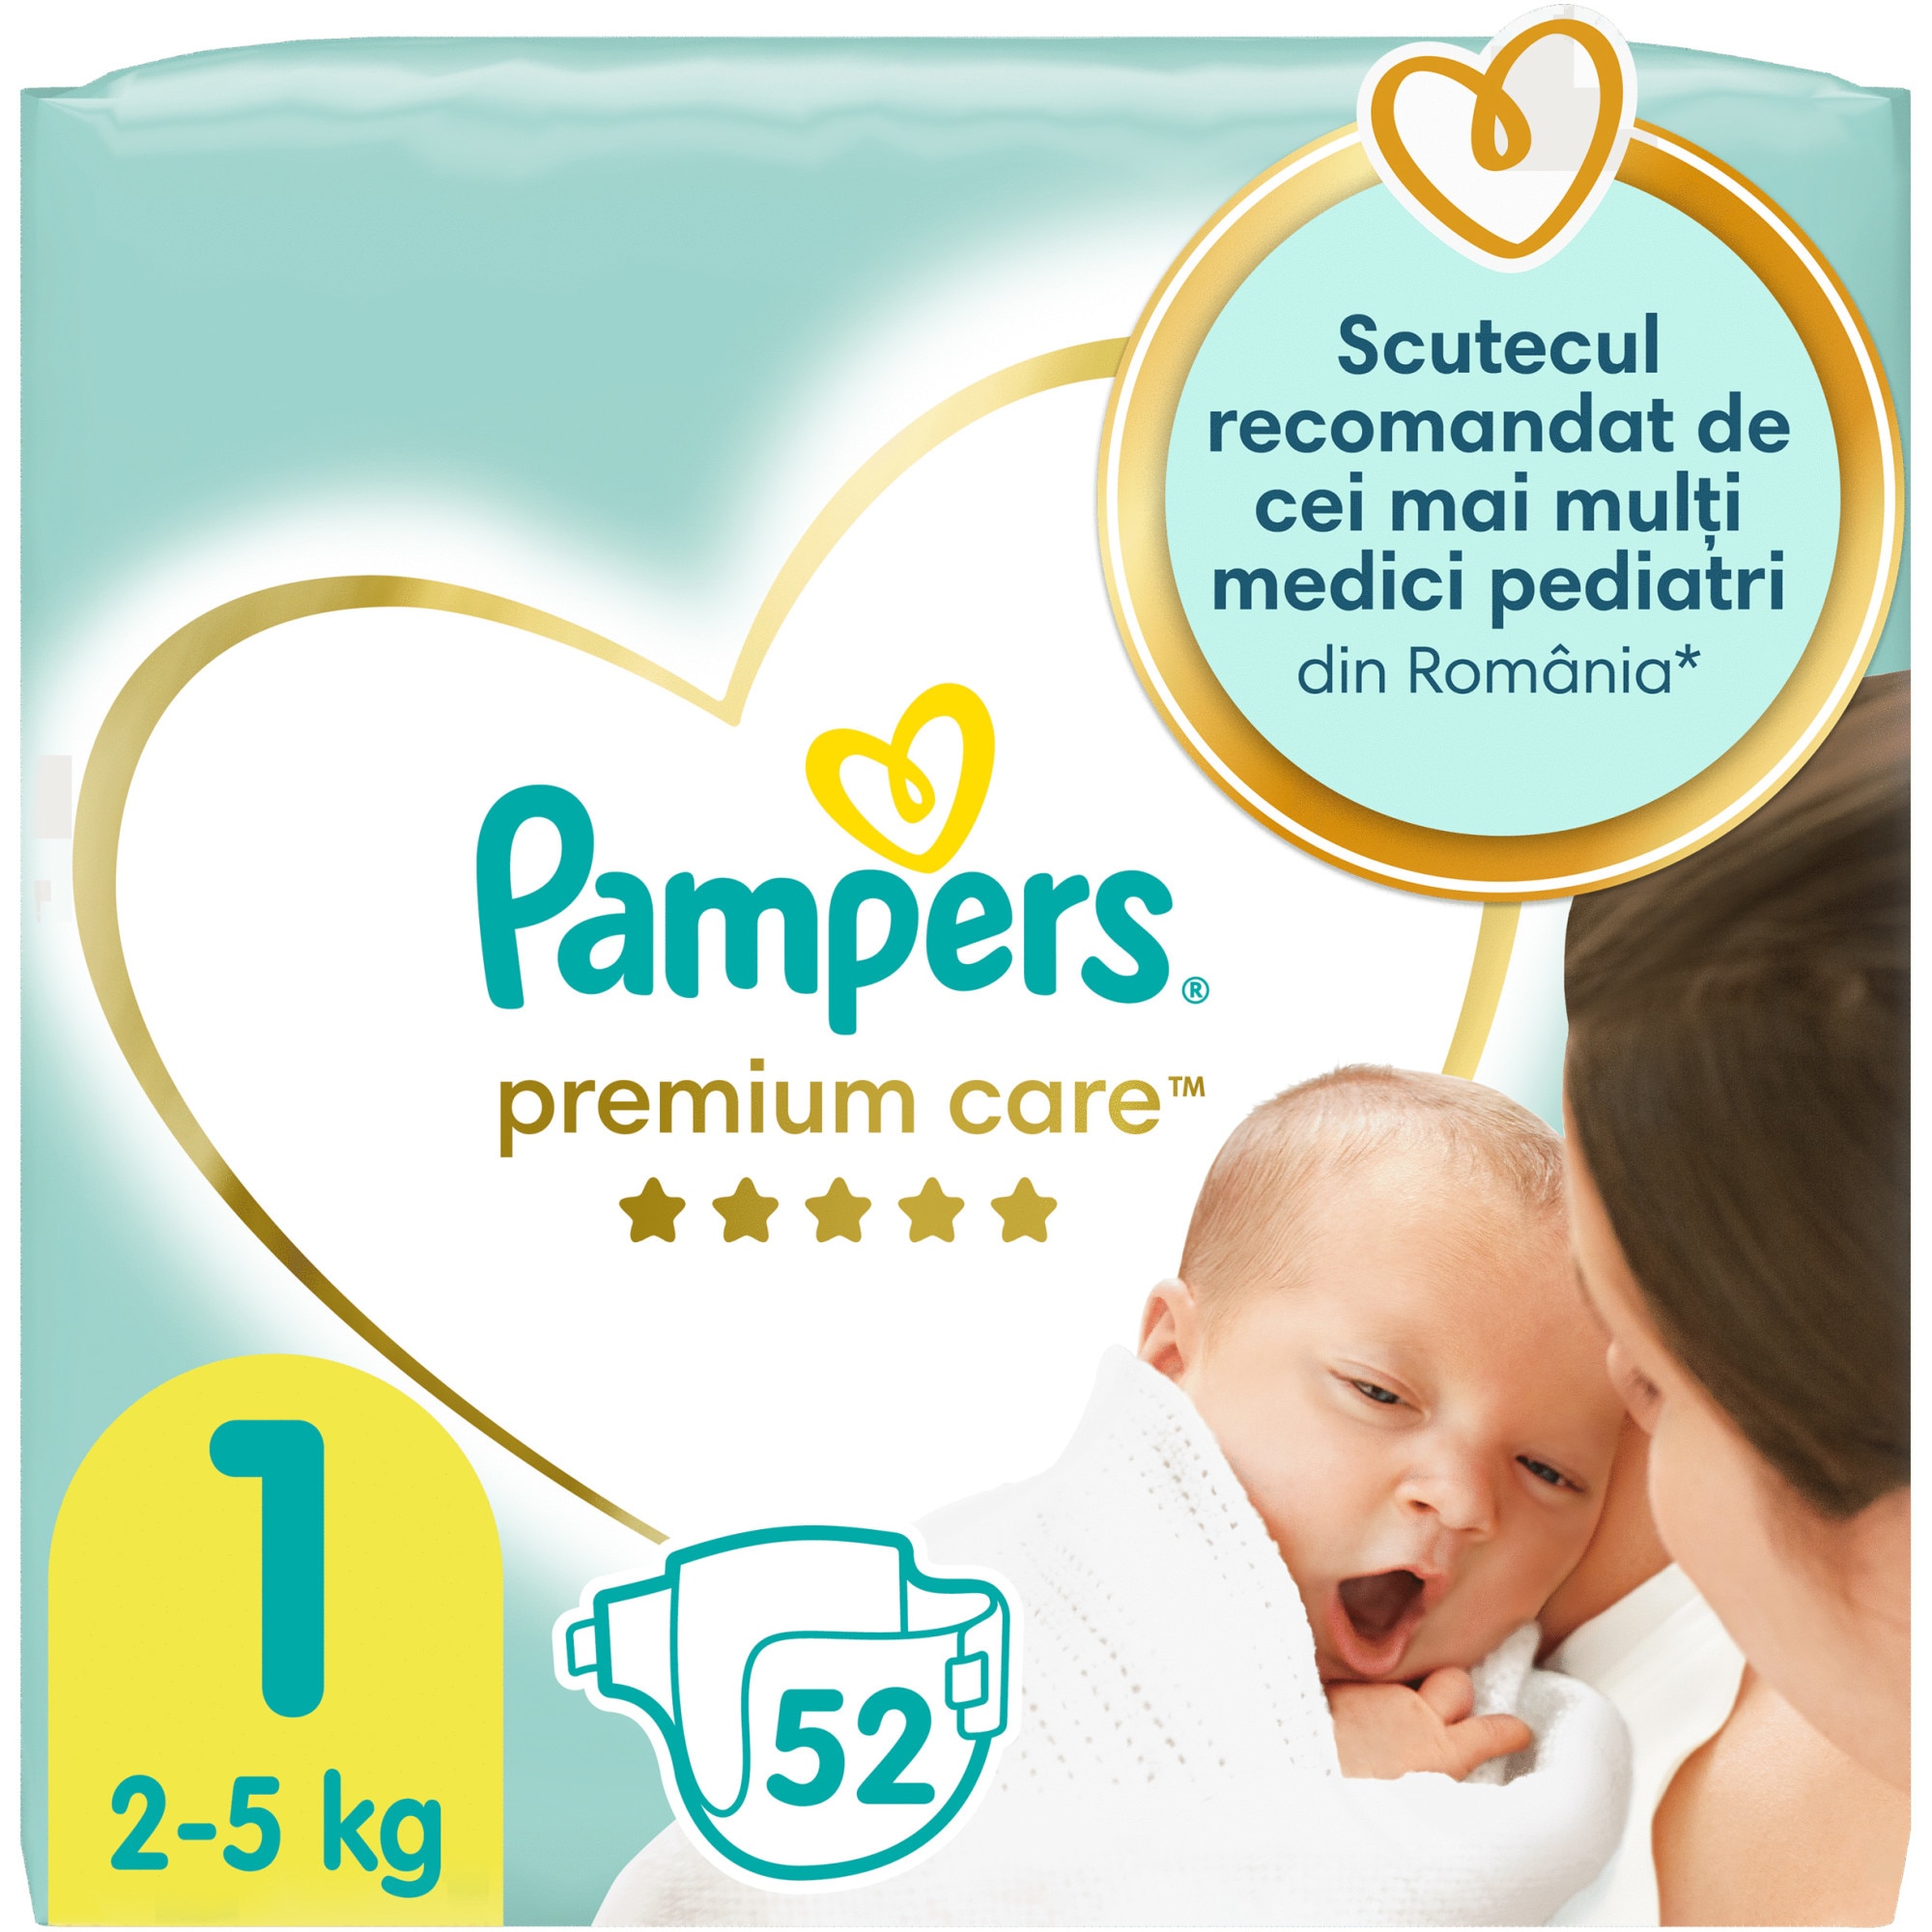 pampers active baby 3 126